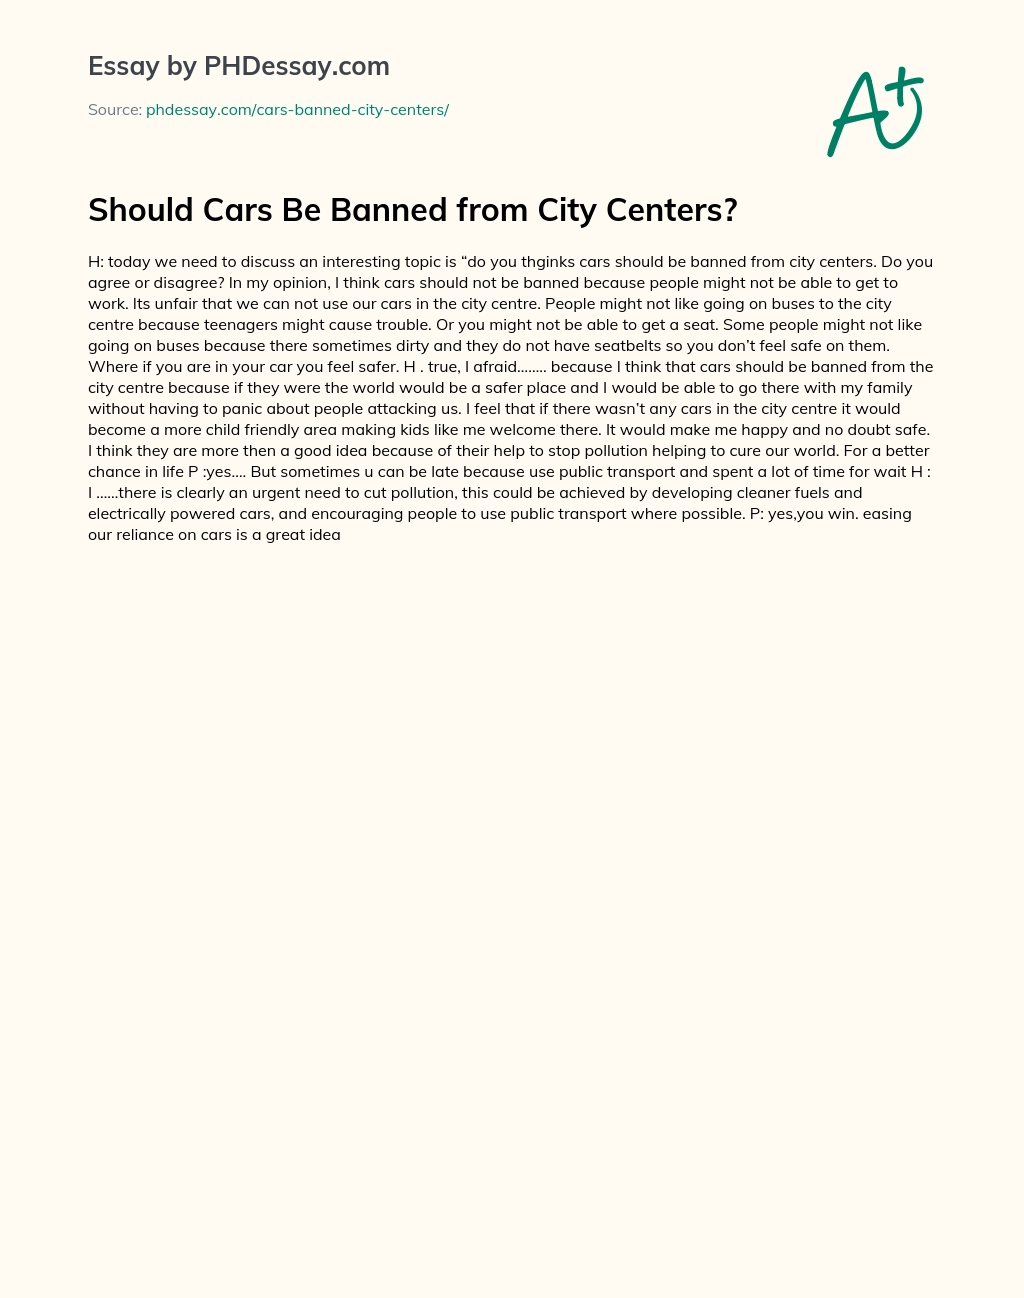 Should Cars Be Banned from City Centers? essay